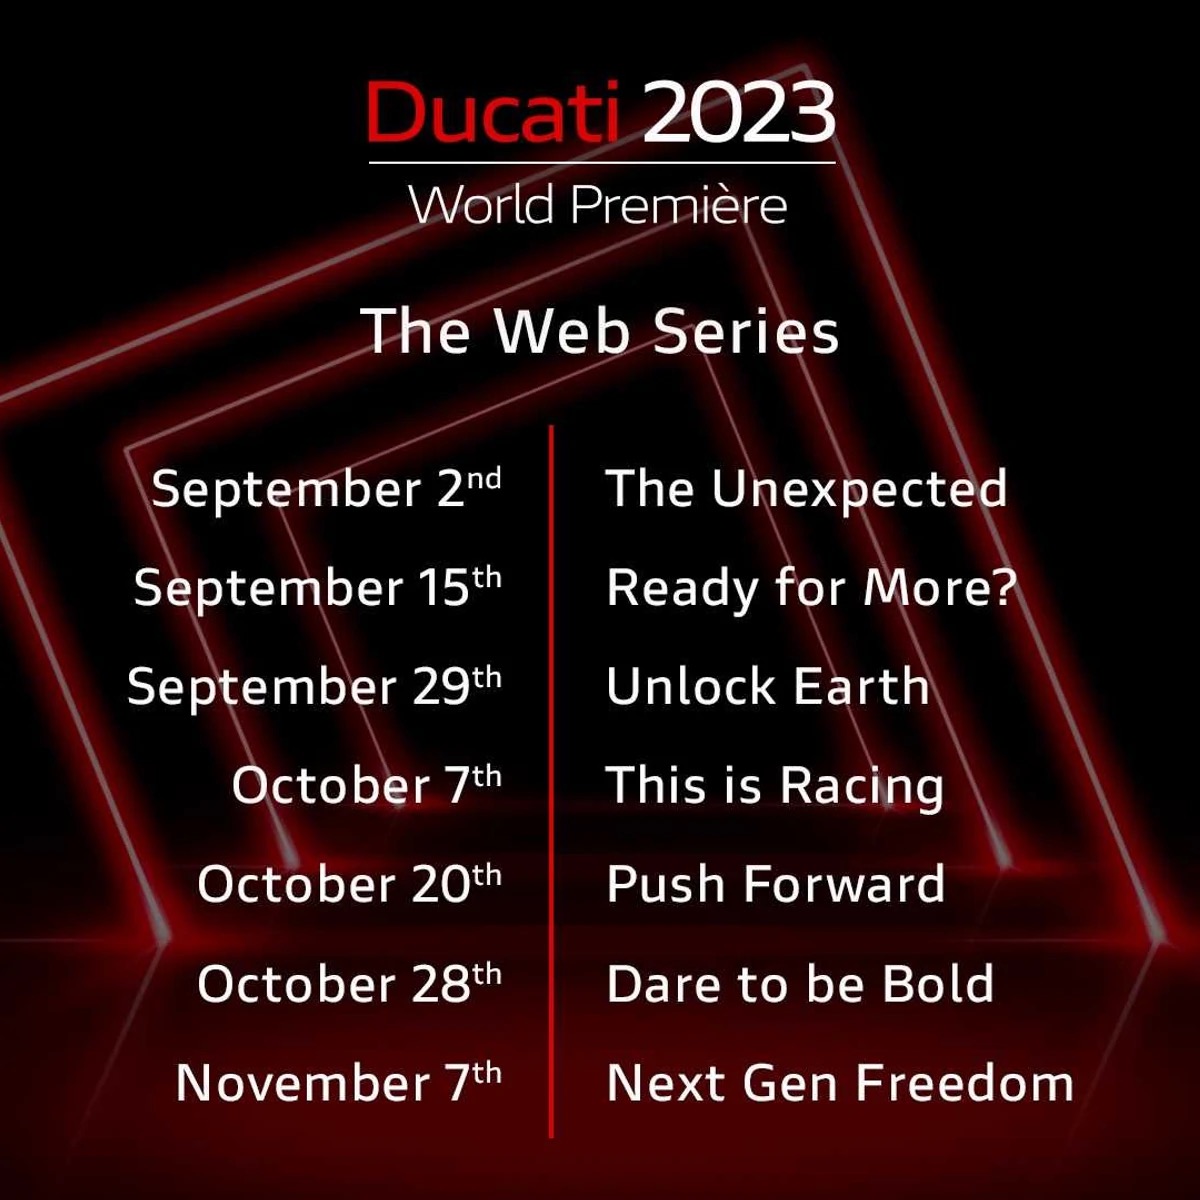 A view of the Ducati World Premiere for 2023. Media sourced from Ducati.